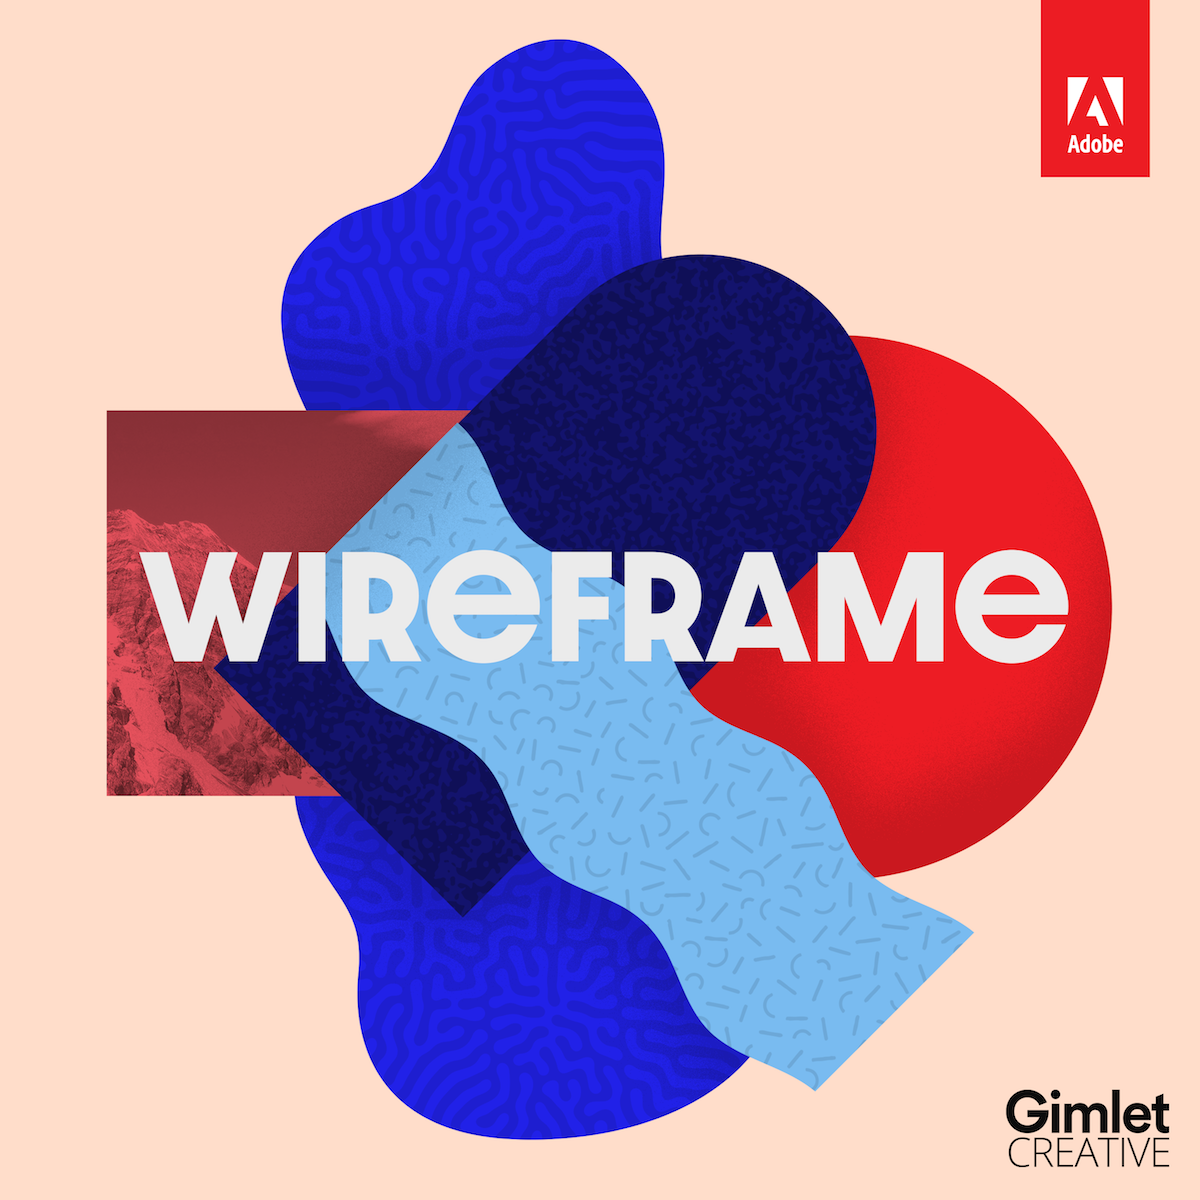 Wireframes idea #24: Wireframe: A High-quality Storytelling Podcast about Design